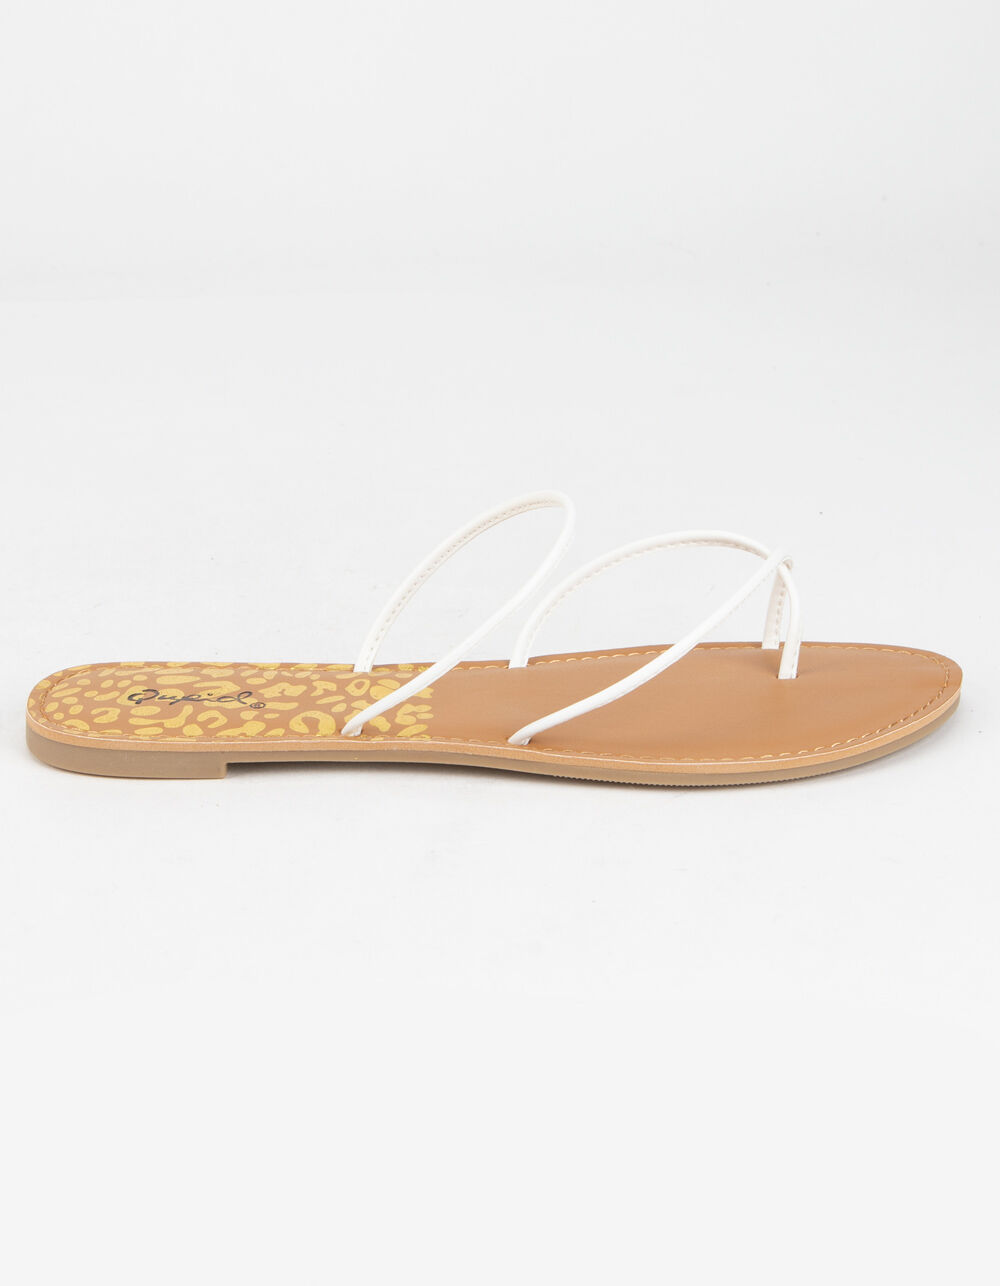 QUPID Strappy Toe Womens White Sandals - WHITE | Tillys